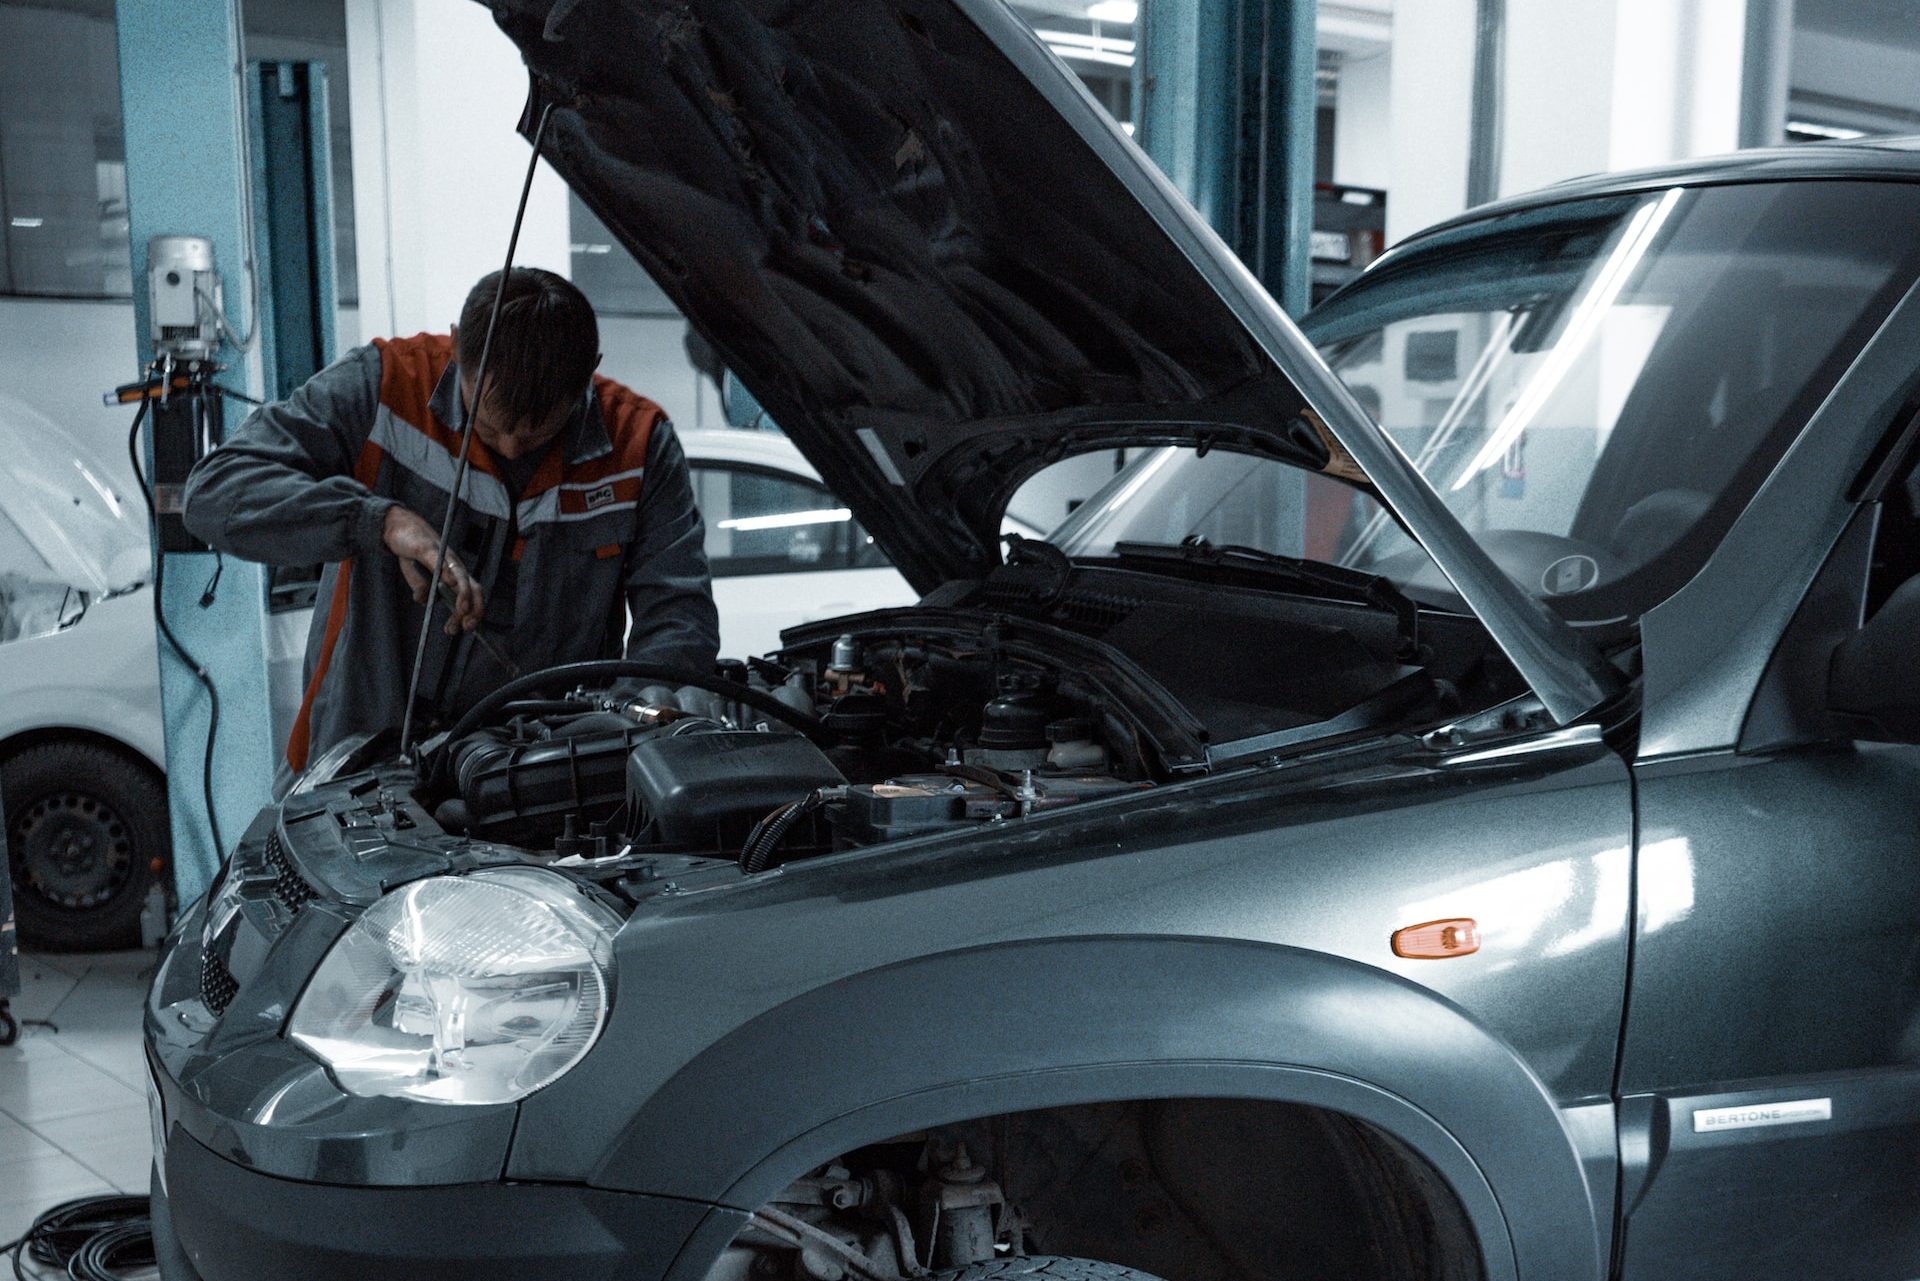 Tell-Tale Signs You Need to Call an Auto Repair Service ASAP